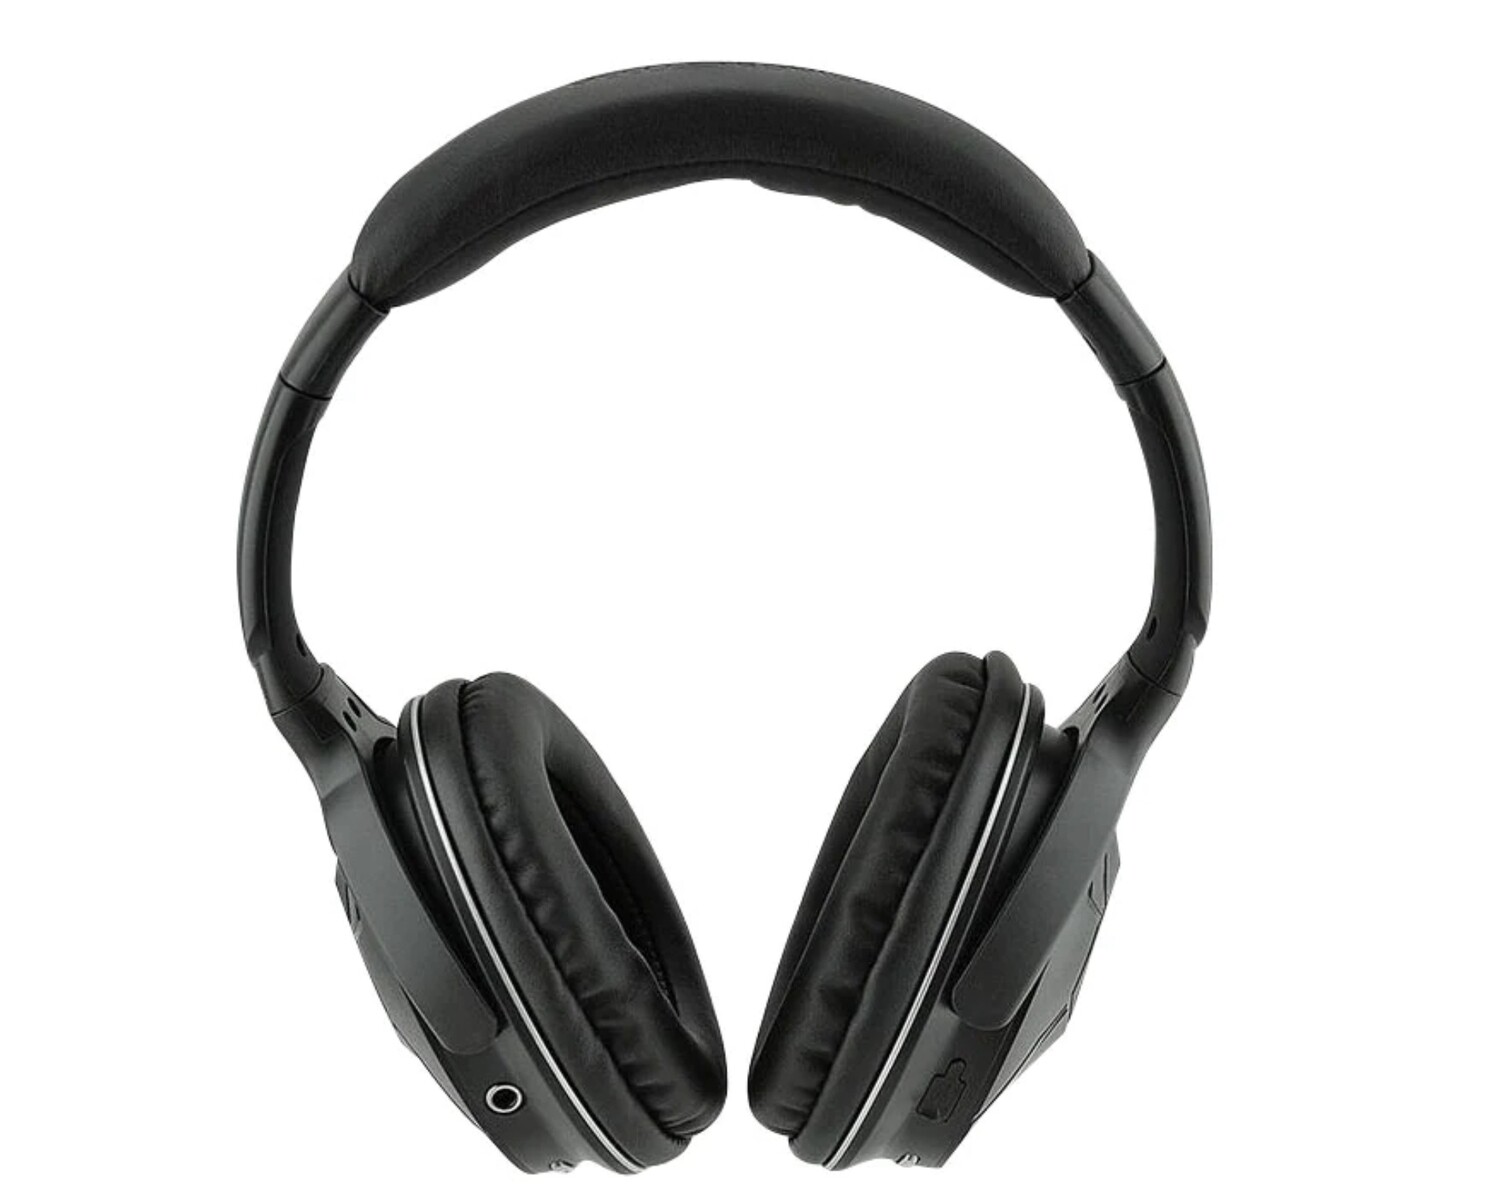 Air-Fi Venture Stereo Bluetooth Wireless Foldable Over-the-Ear Headphones with a separate (1/8) stereo connection port without the need to be powered on plus a carrying pouch.